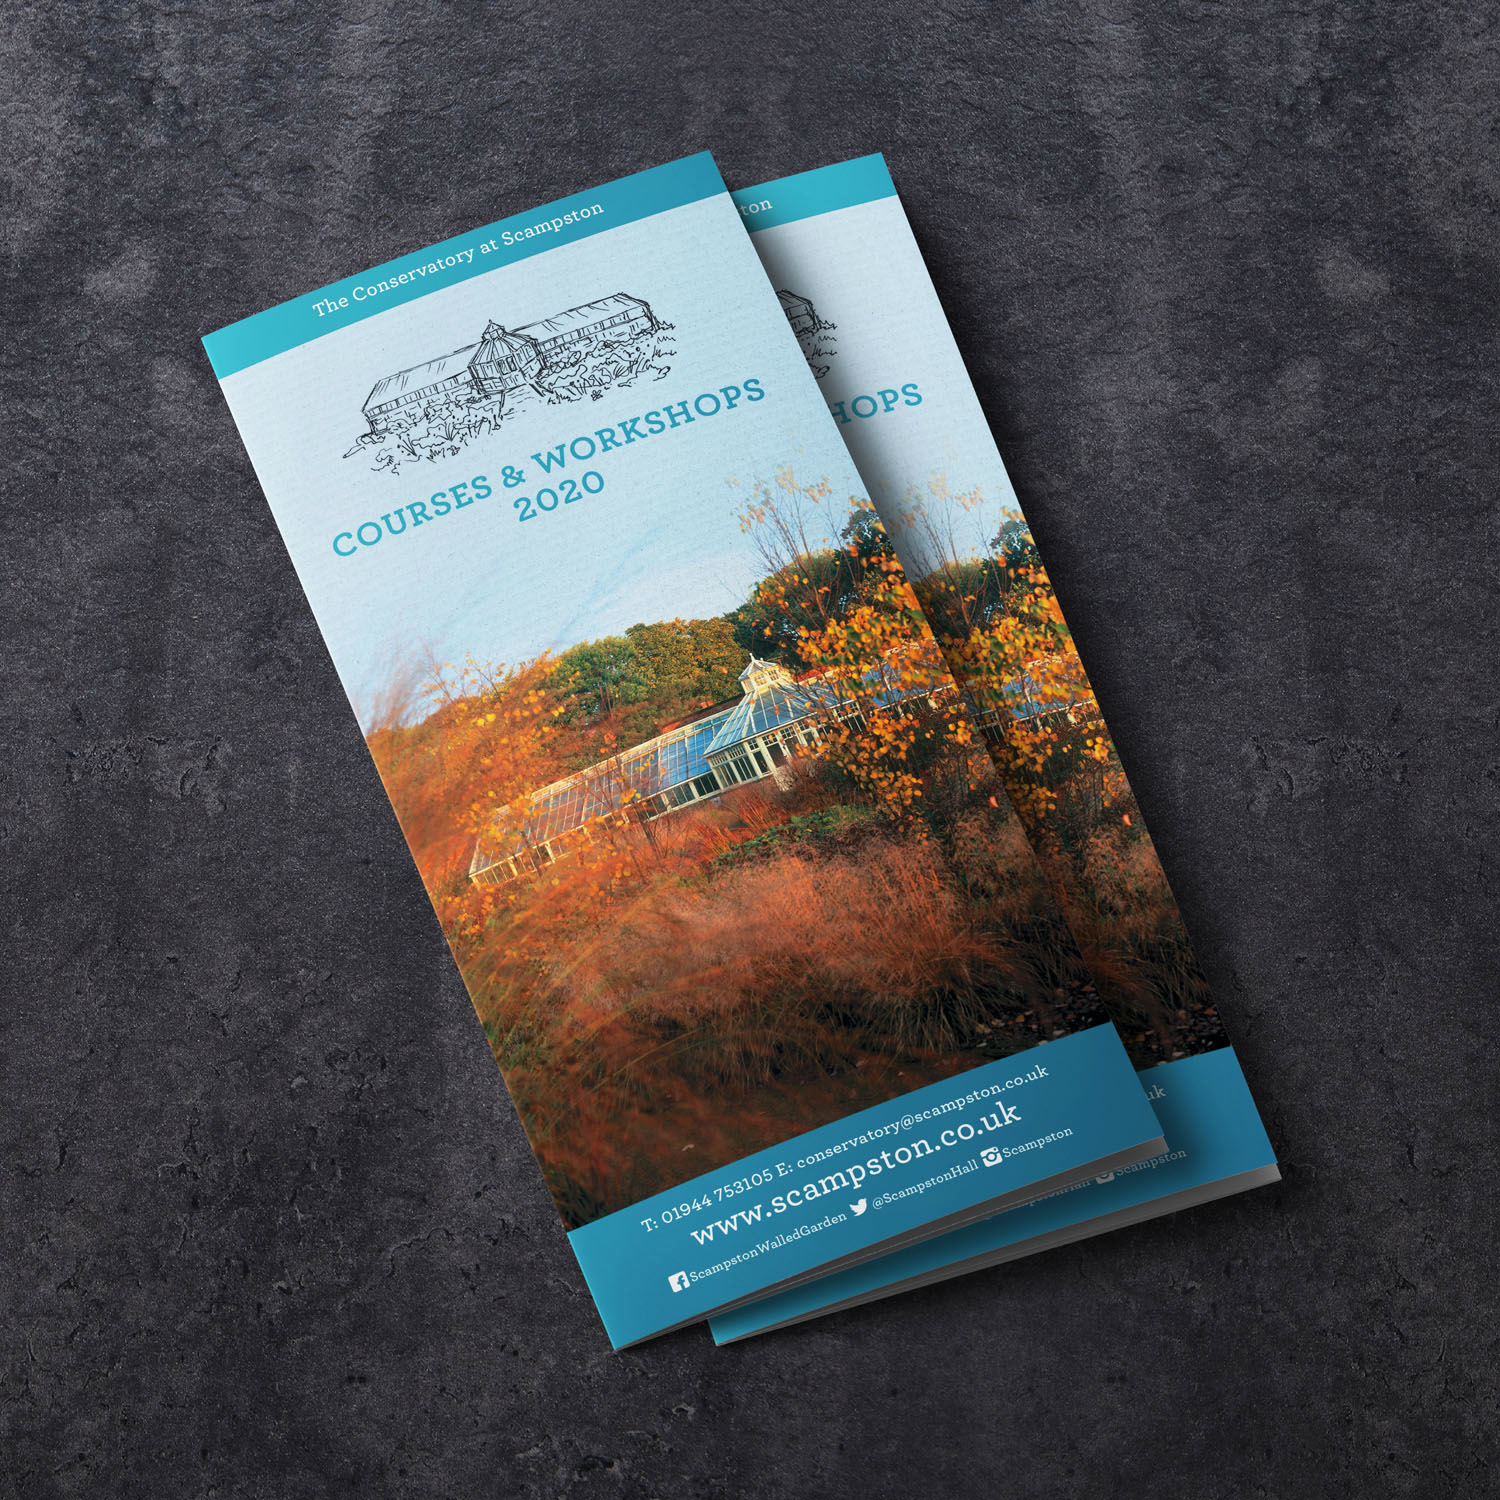 The Conservatory at Scampston - Courses & Workshops A4 Leaflet